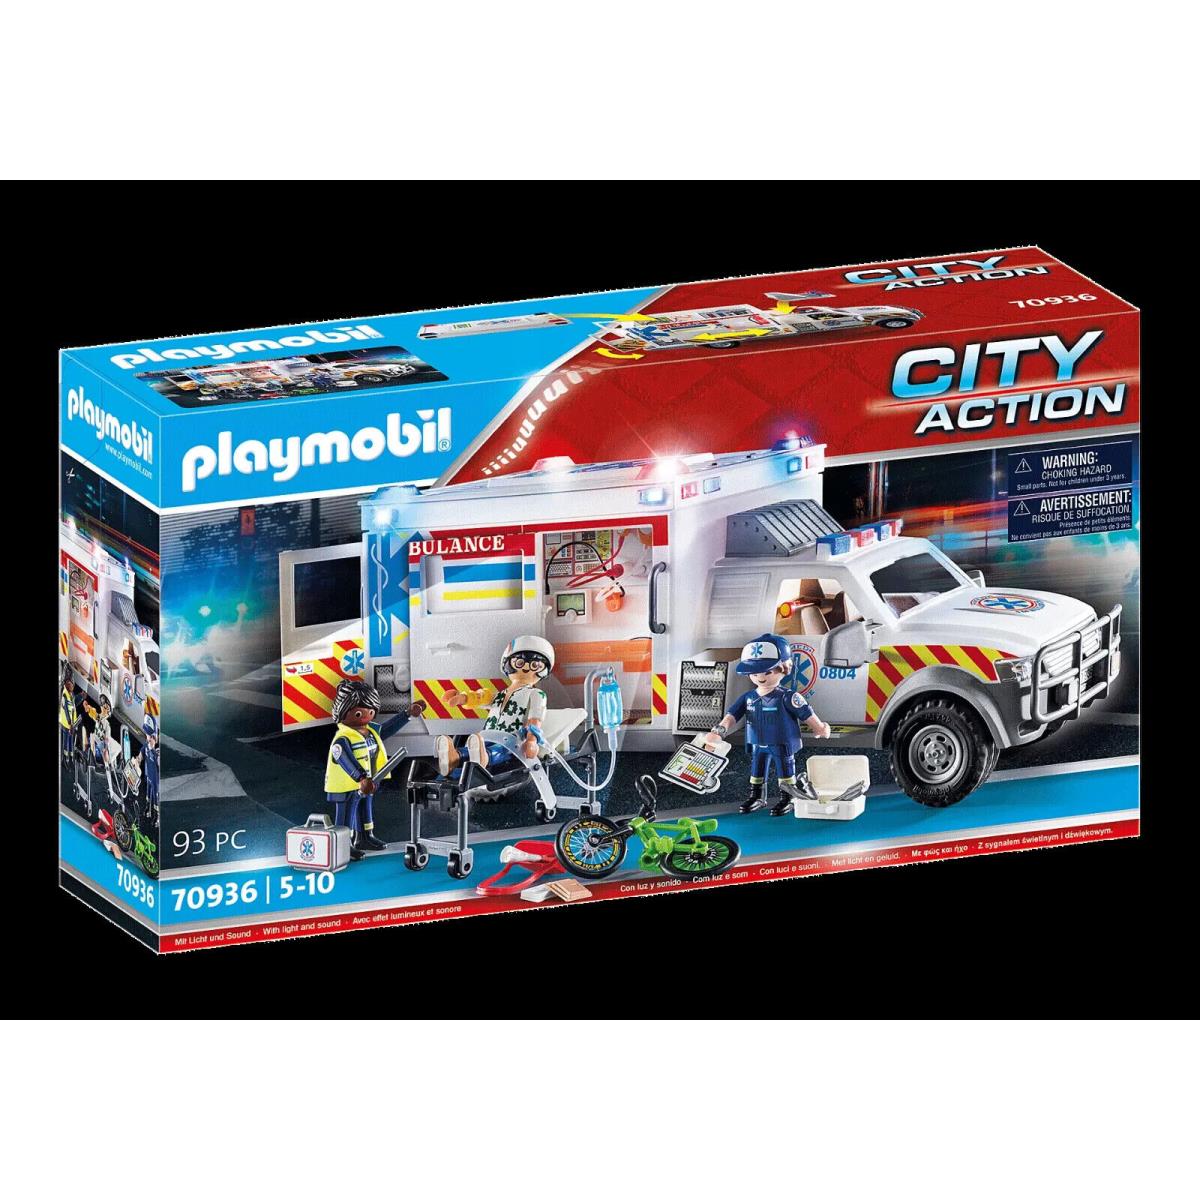 Playmobil 70937 City Action Rescue Ambulance with Lights and Sound Mib/new